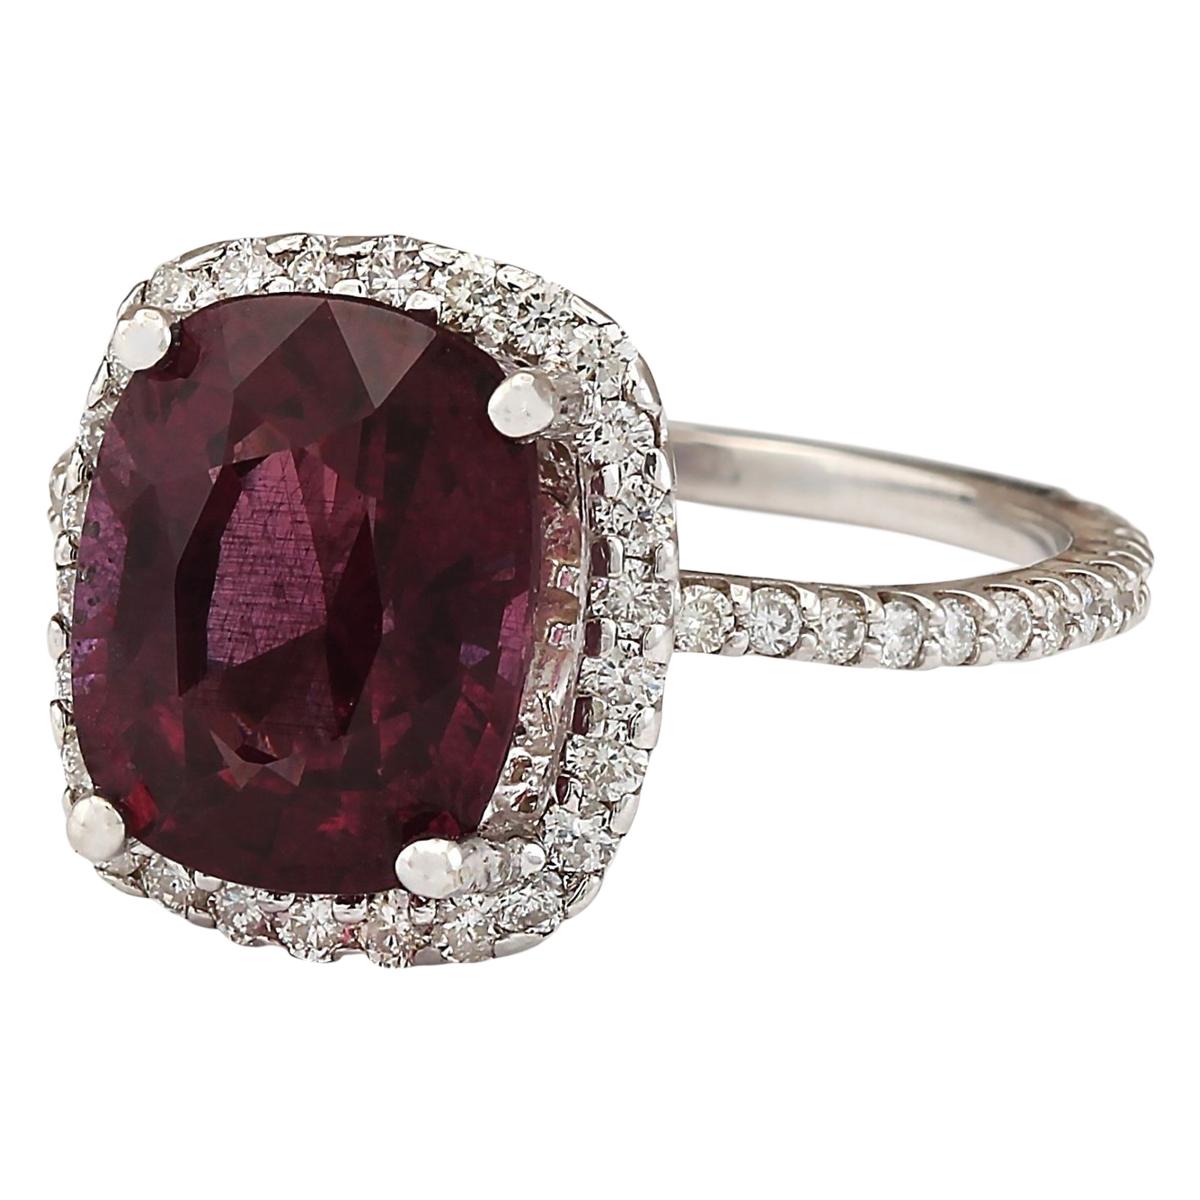 Stamped: 14K White Gold
Total Ring Weight: 3.4 Grams
Total Natural Garnet Weight is 3.92 Carat (Measures: 10.00x8.00 mm)
Color: Red
Total Natural Diamond Weight is 0.70 Carat
Color: F-G, Clarity: VS2-SI1
Face Measures: 12.80x11.40 mm
Sku: [703897W]